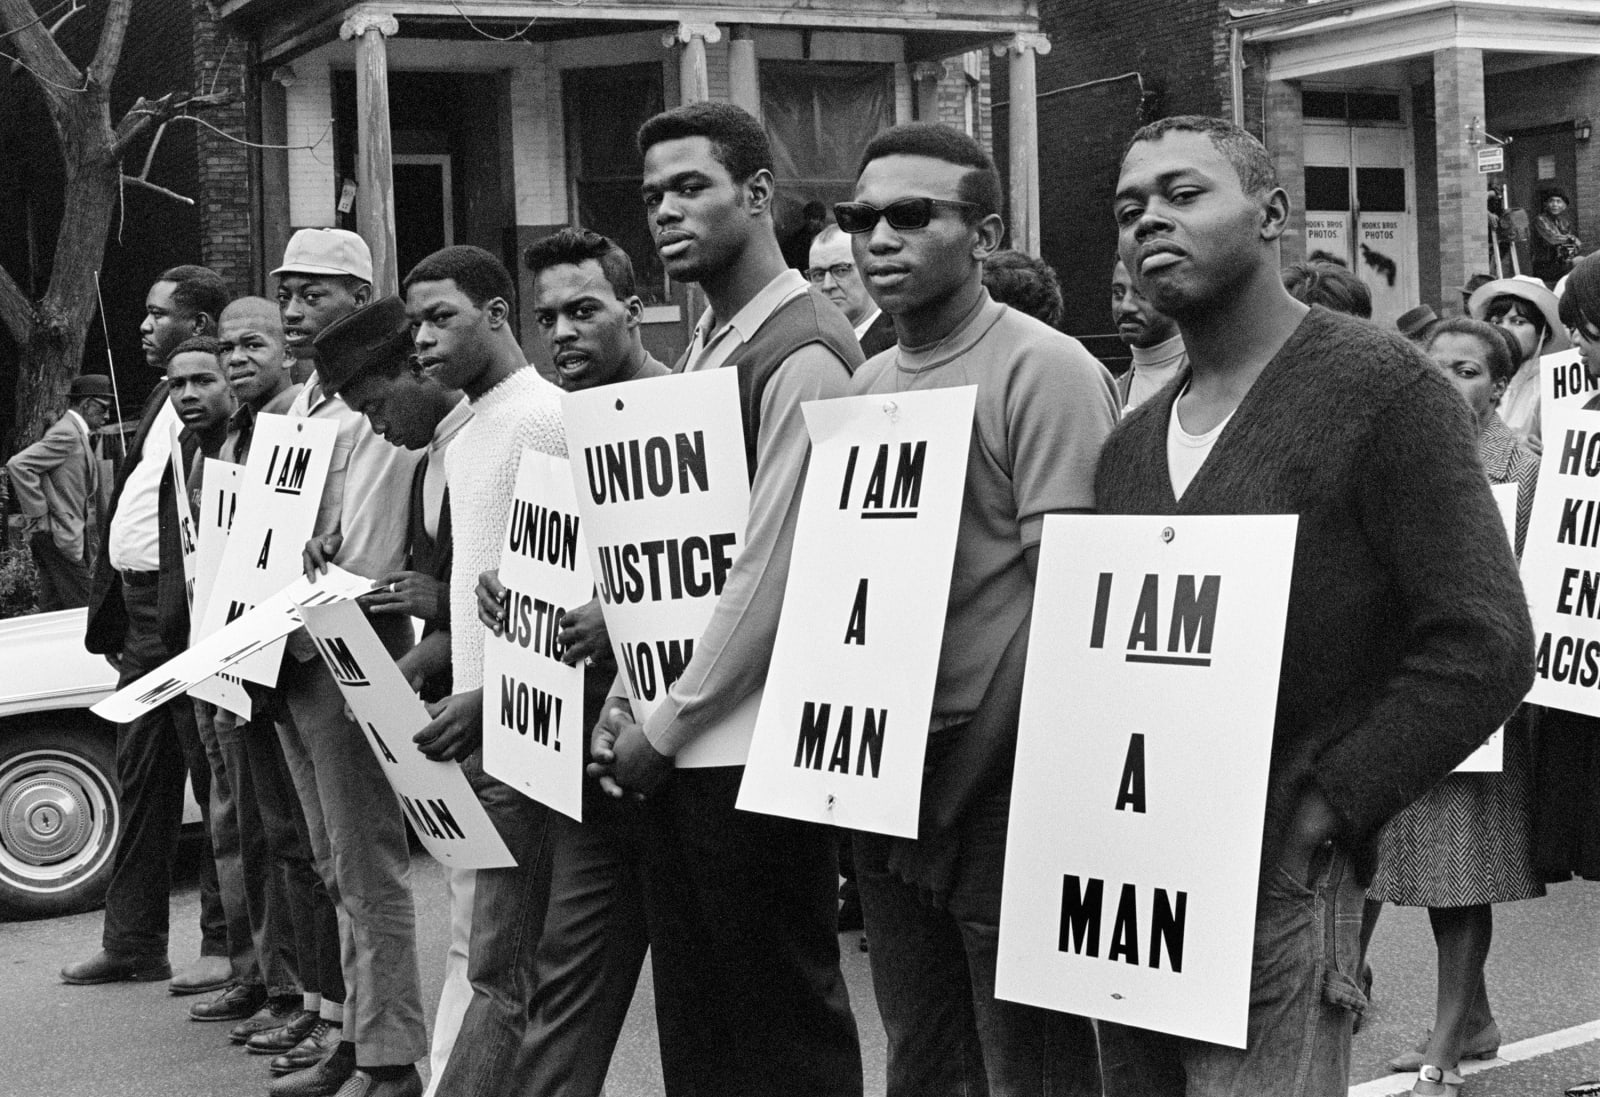 Builder Levy, I Am a Man/Union Justice Now, Memphis, Tennessee, 1968